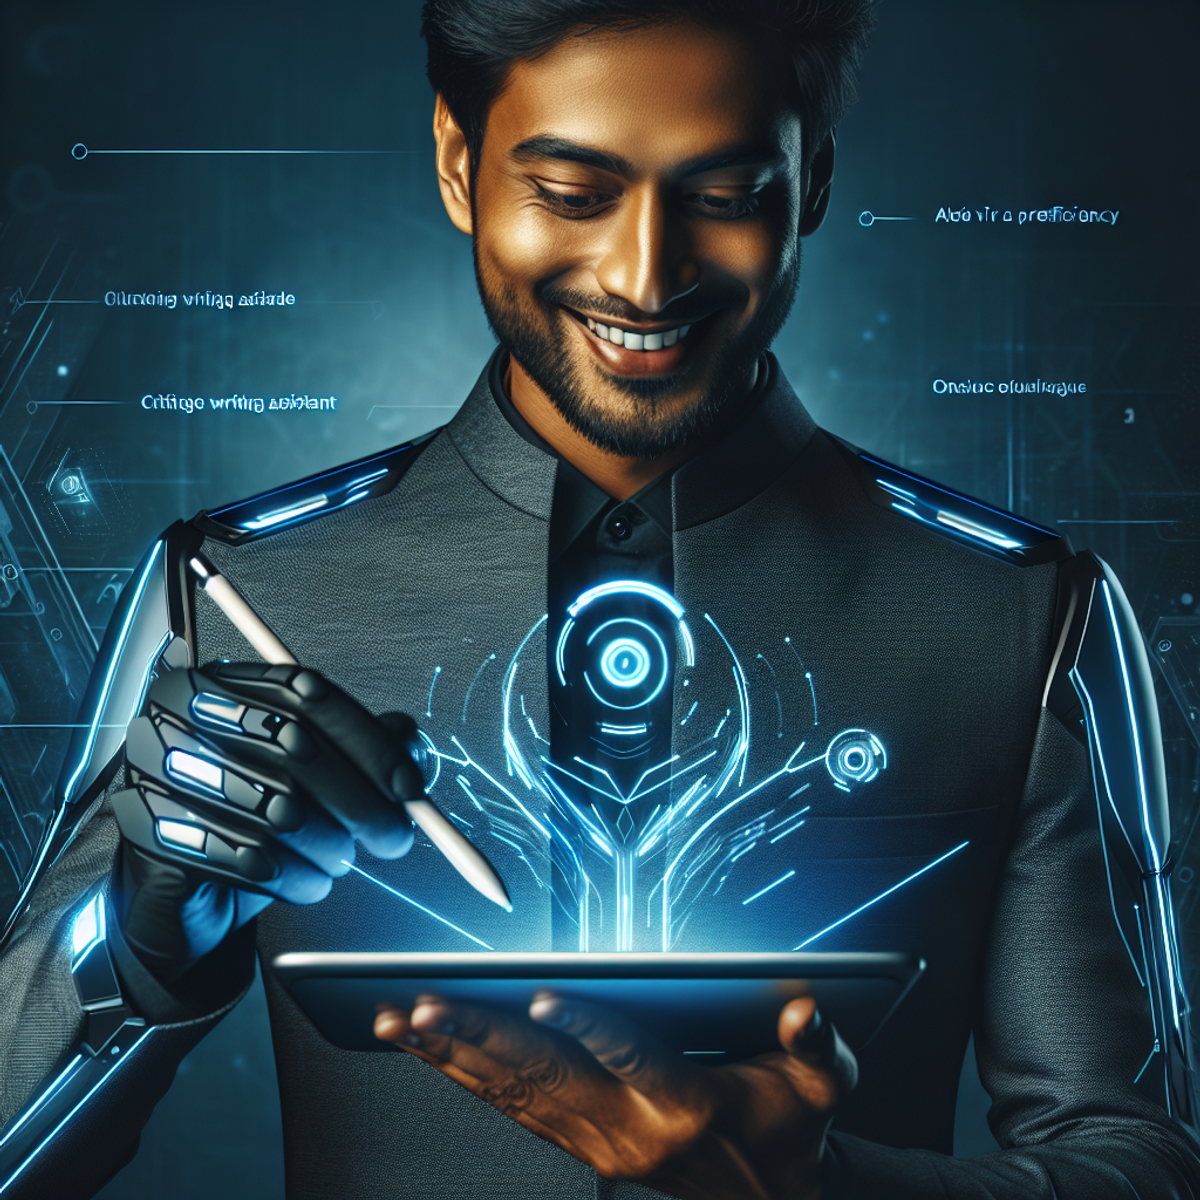 A South Asian male in tech-savvy attire, confidently using a stylus on a futuristic tablet emitting a subtle blue glow.